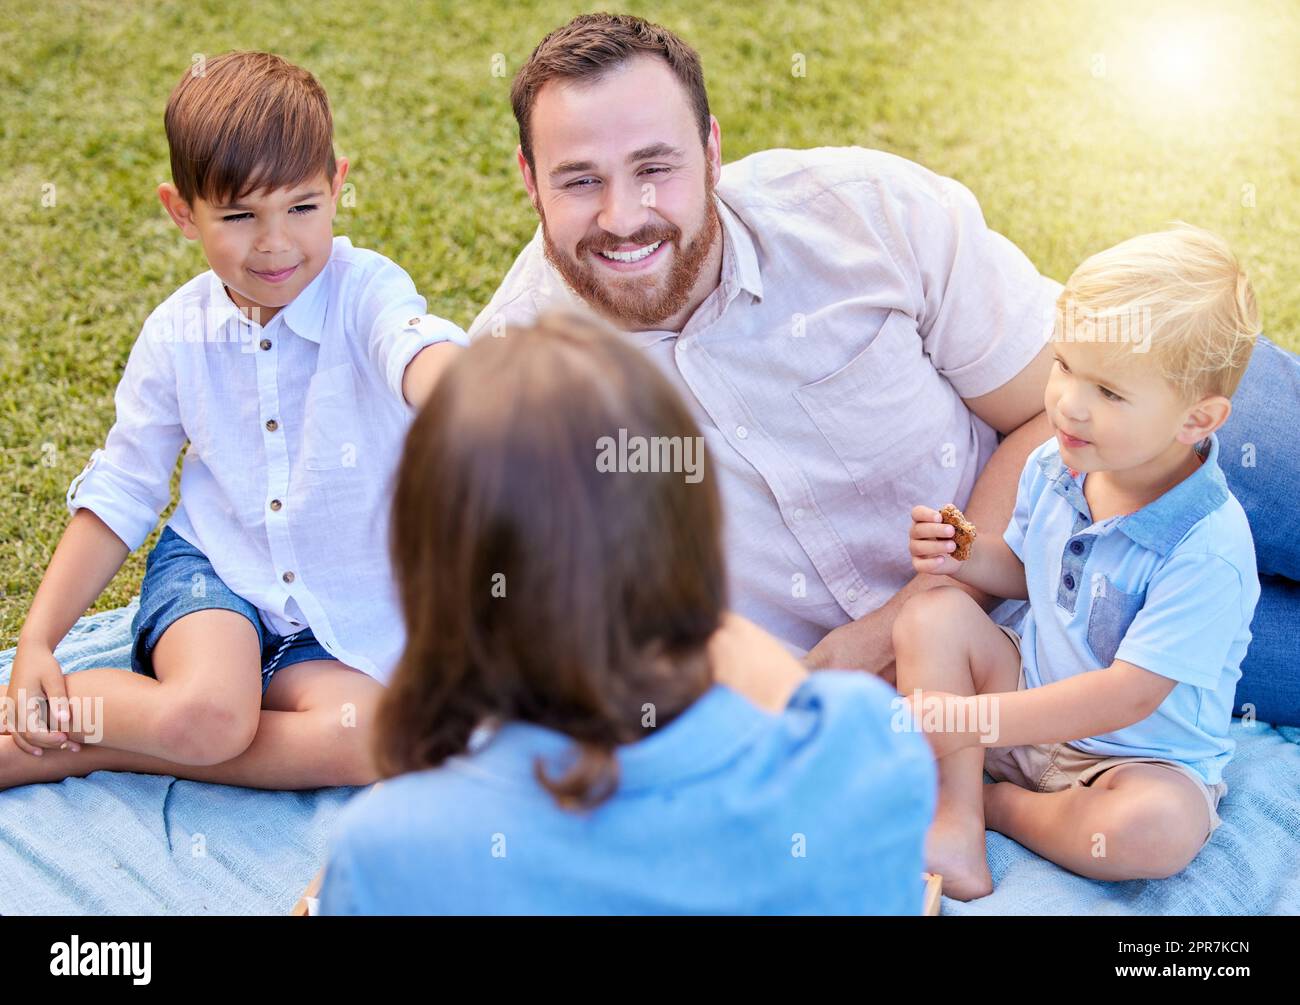 Its bonding time. a young family spending a day at the park. Stock Photo